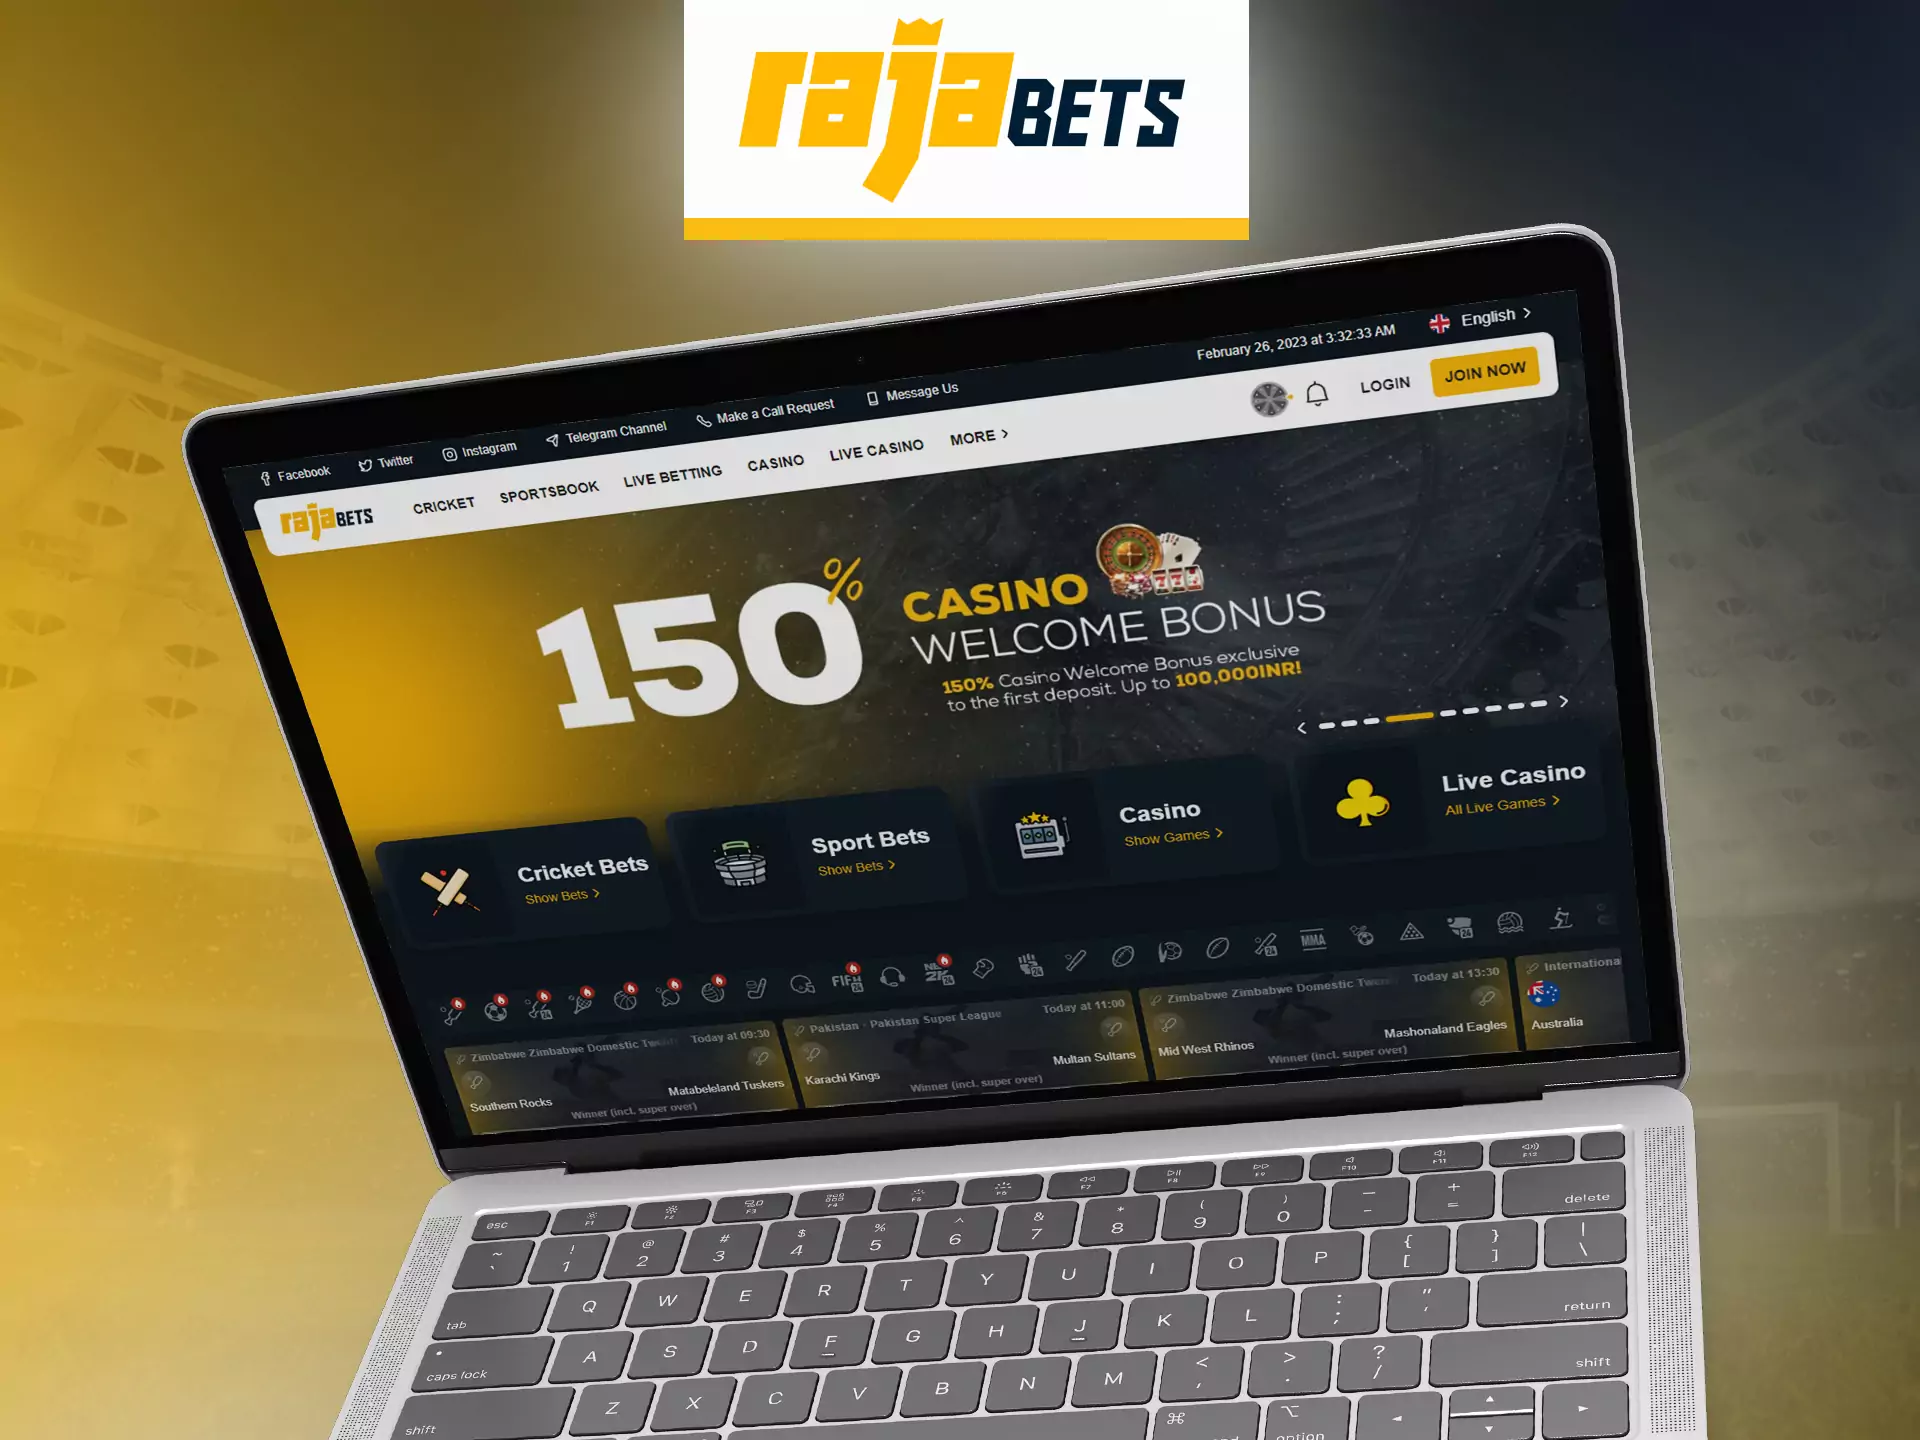 Visit the official Rajabets website to place your bets.